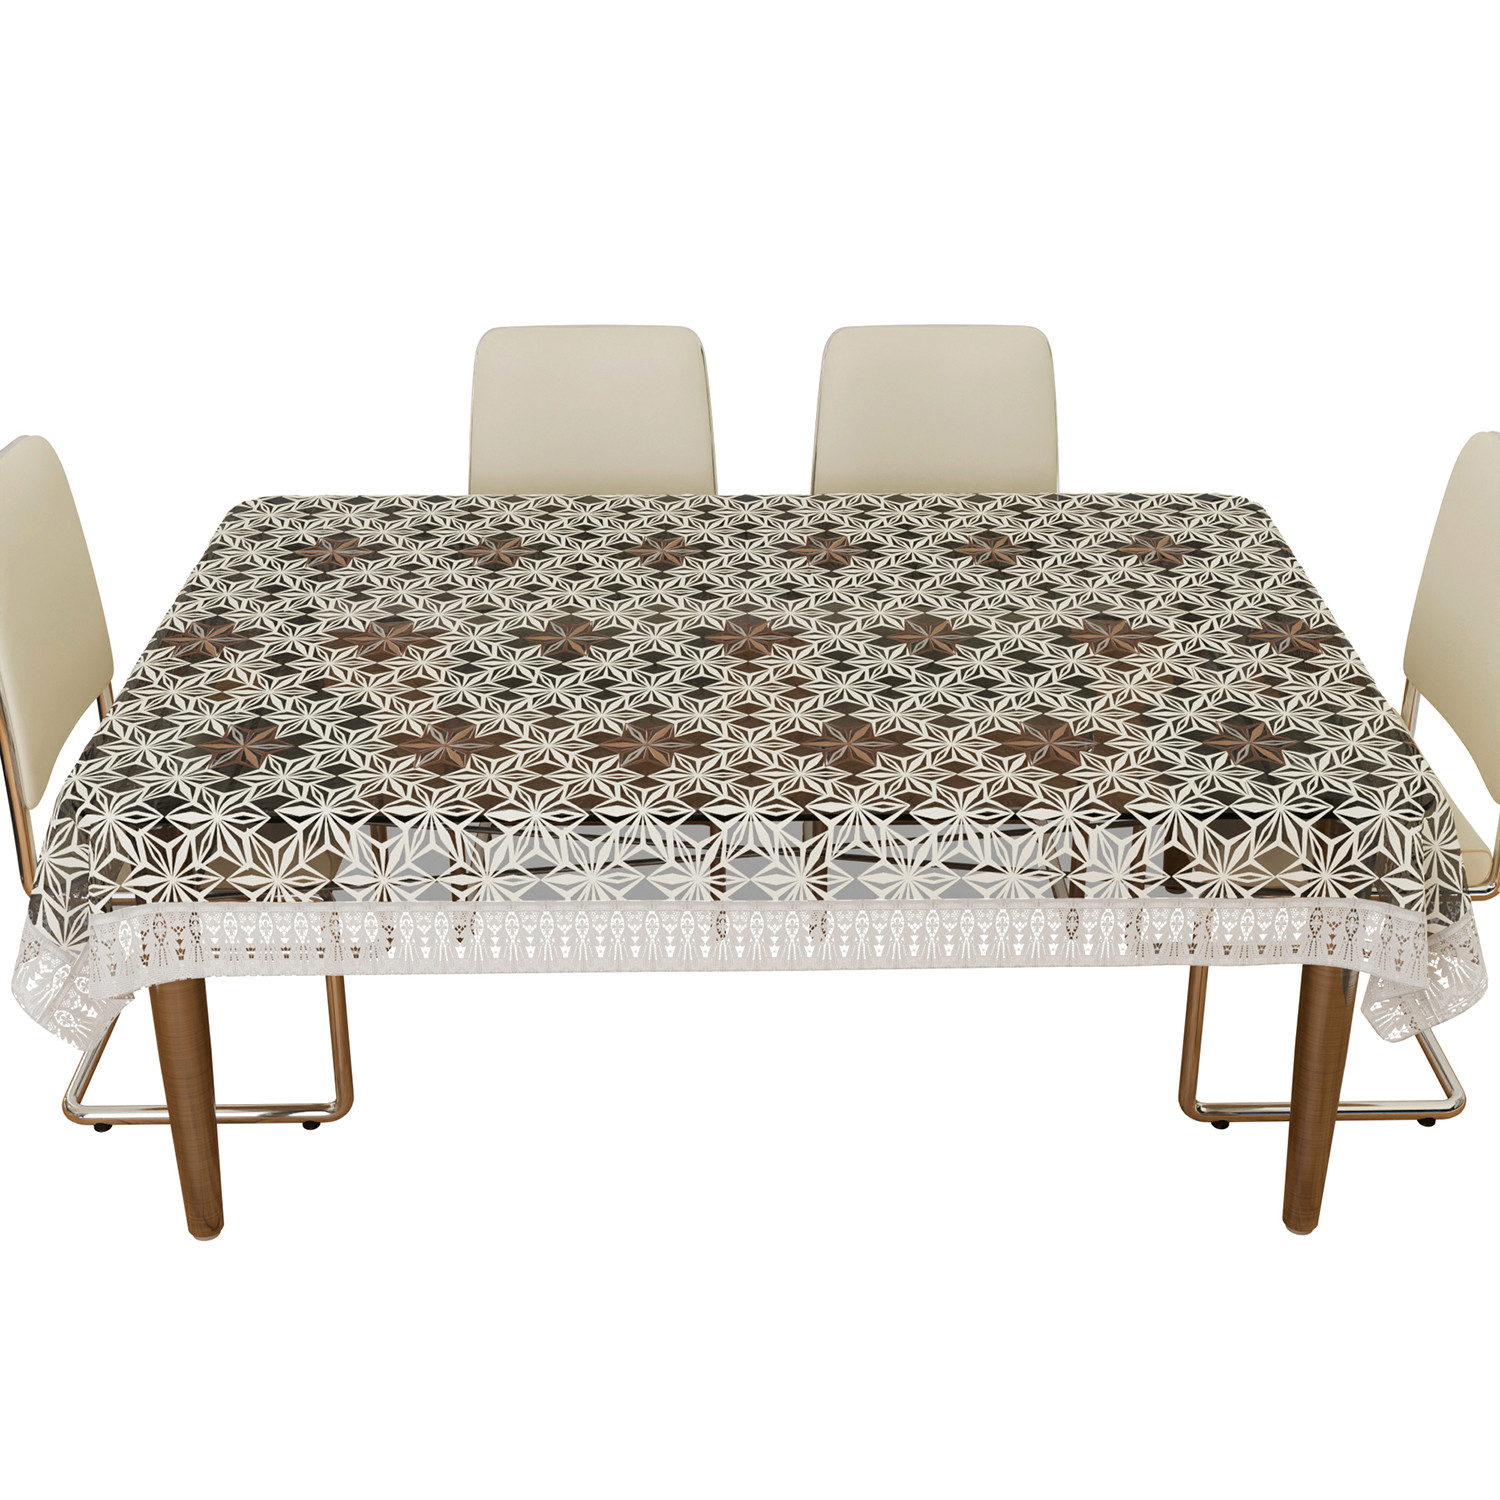 Kuber Industries Dining Table Cover | PVC Table Cover | Star Maiva Embroidery Table Cover | Table Protector | Table Cover for Dining Table | 60X90 Inch | DTC | Cream